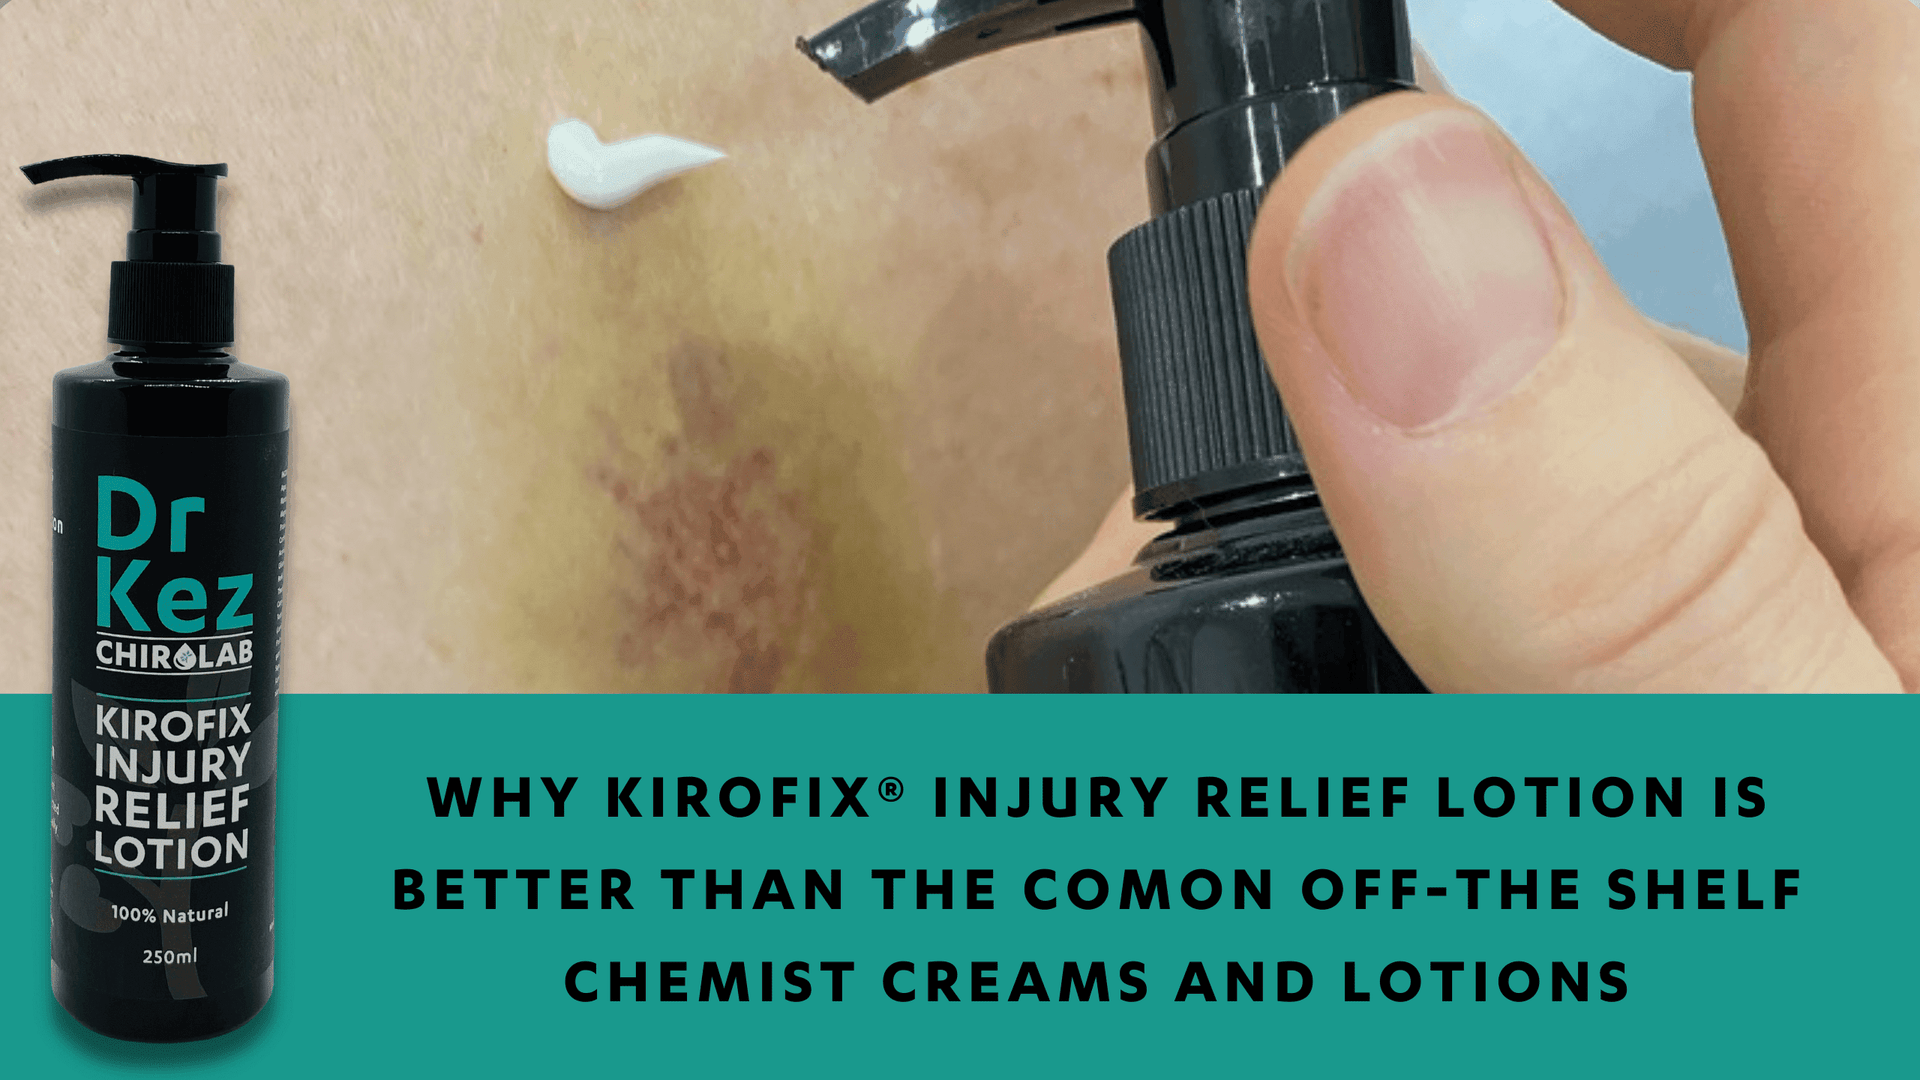 Why Kirofix® Injury Relief Lotion is better than the common off-the shelf Chemist creams and lotions. - Dr Kez Chirolab 